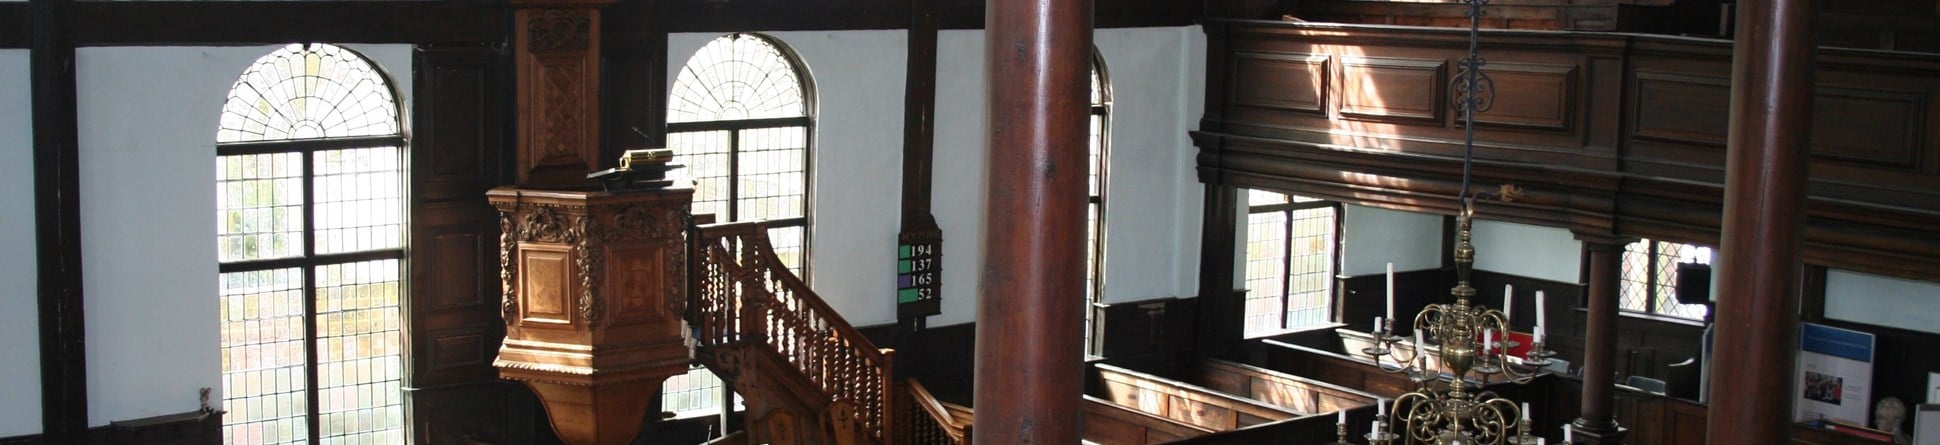 The interior of the Unitarian Meeting House in Ipswich is classically grand with wooden box pews and a beautifully carved pulpit.